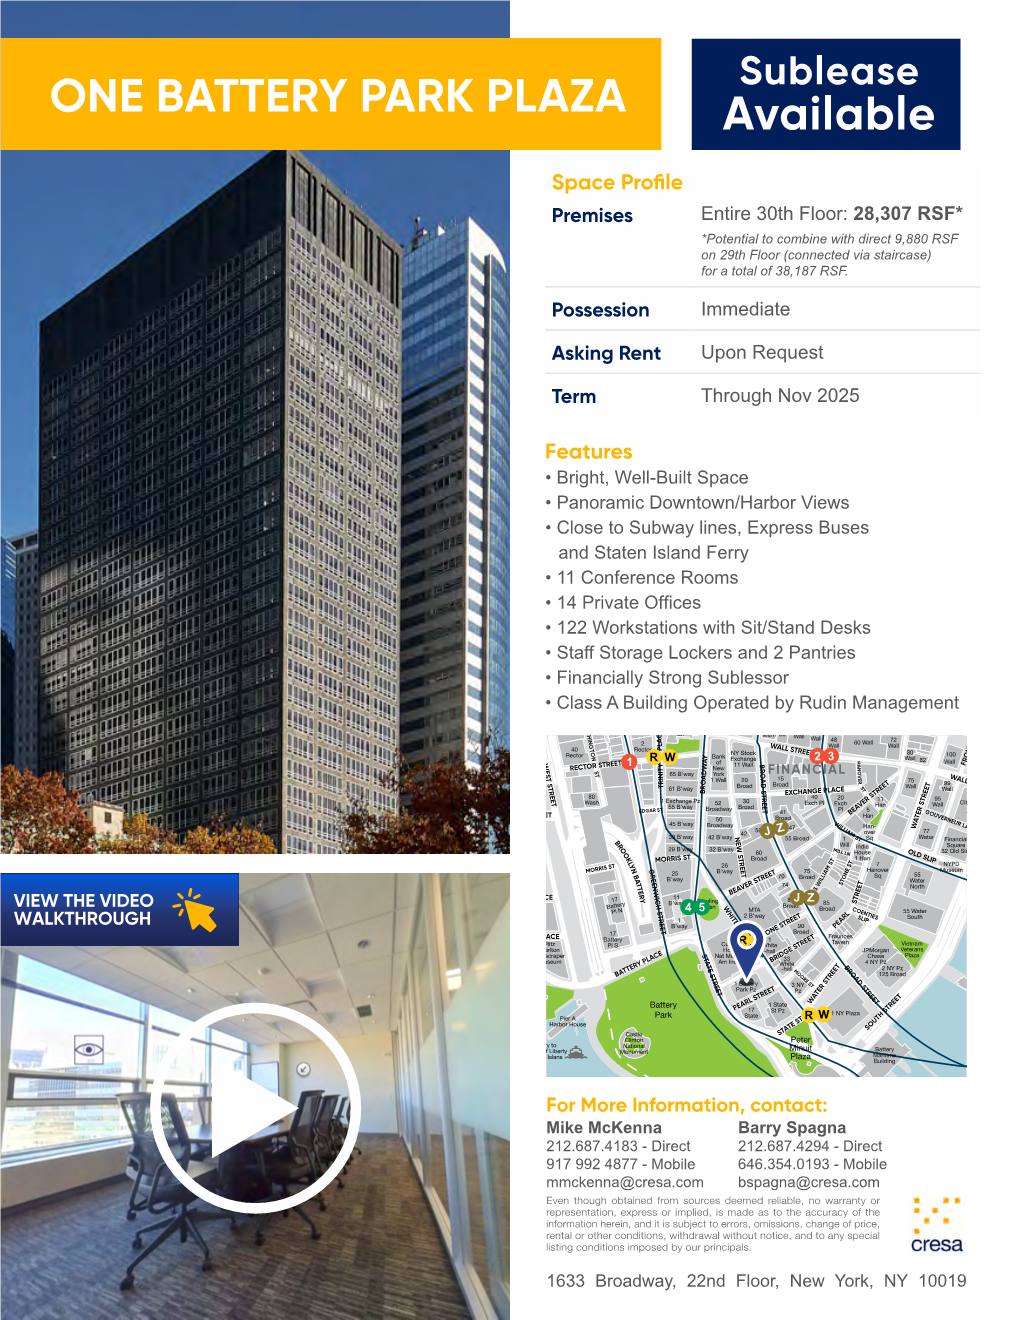 ONE BATTERY PARK PLAZA Available